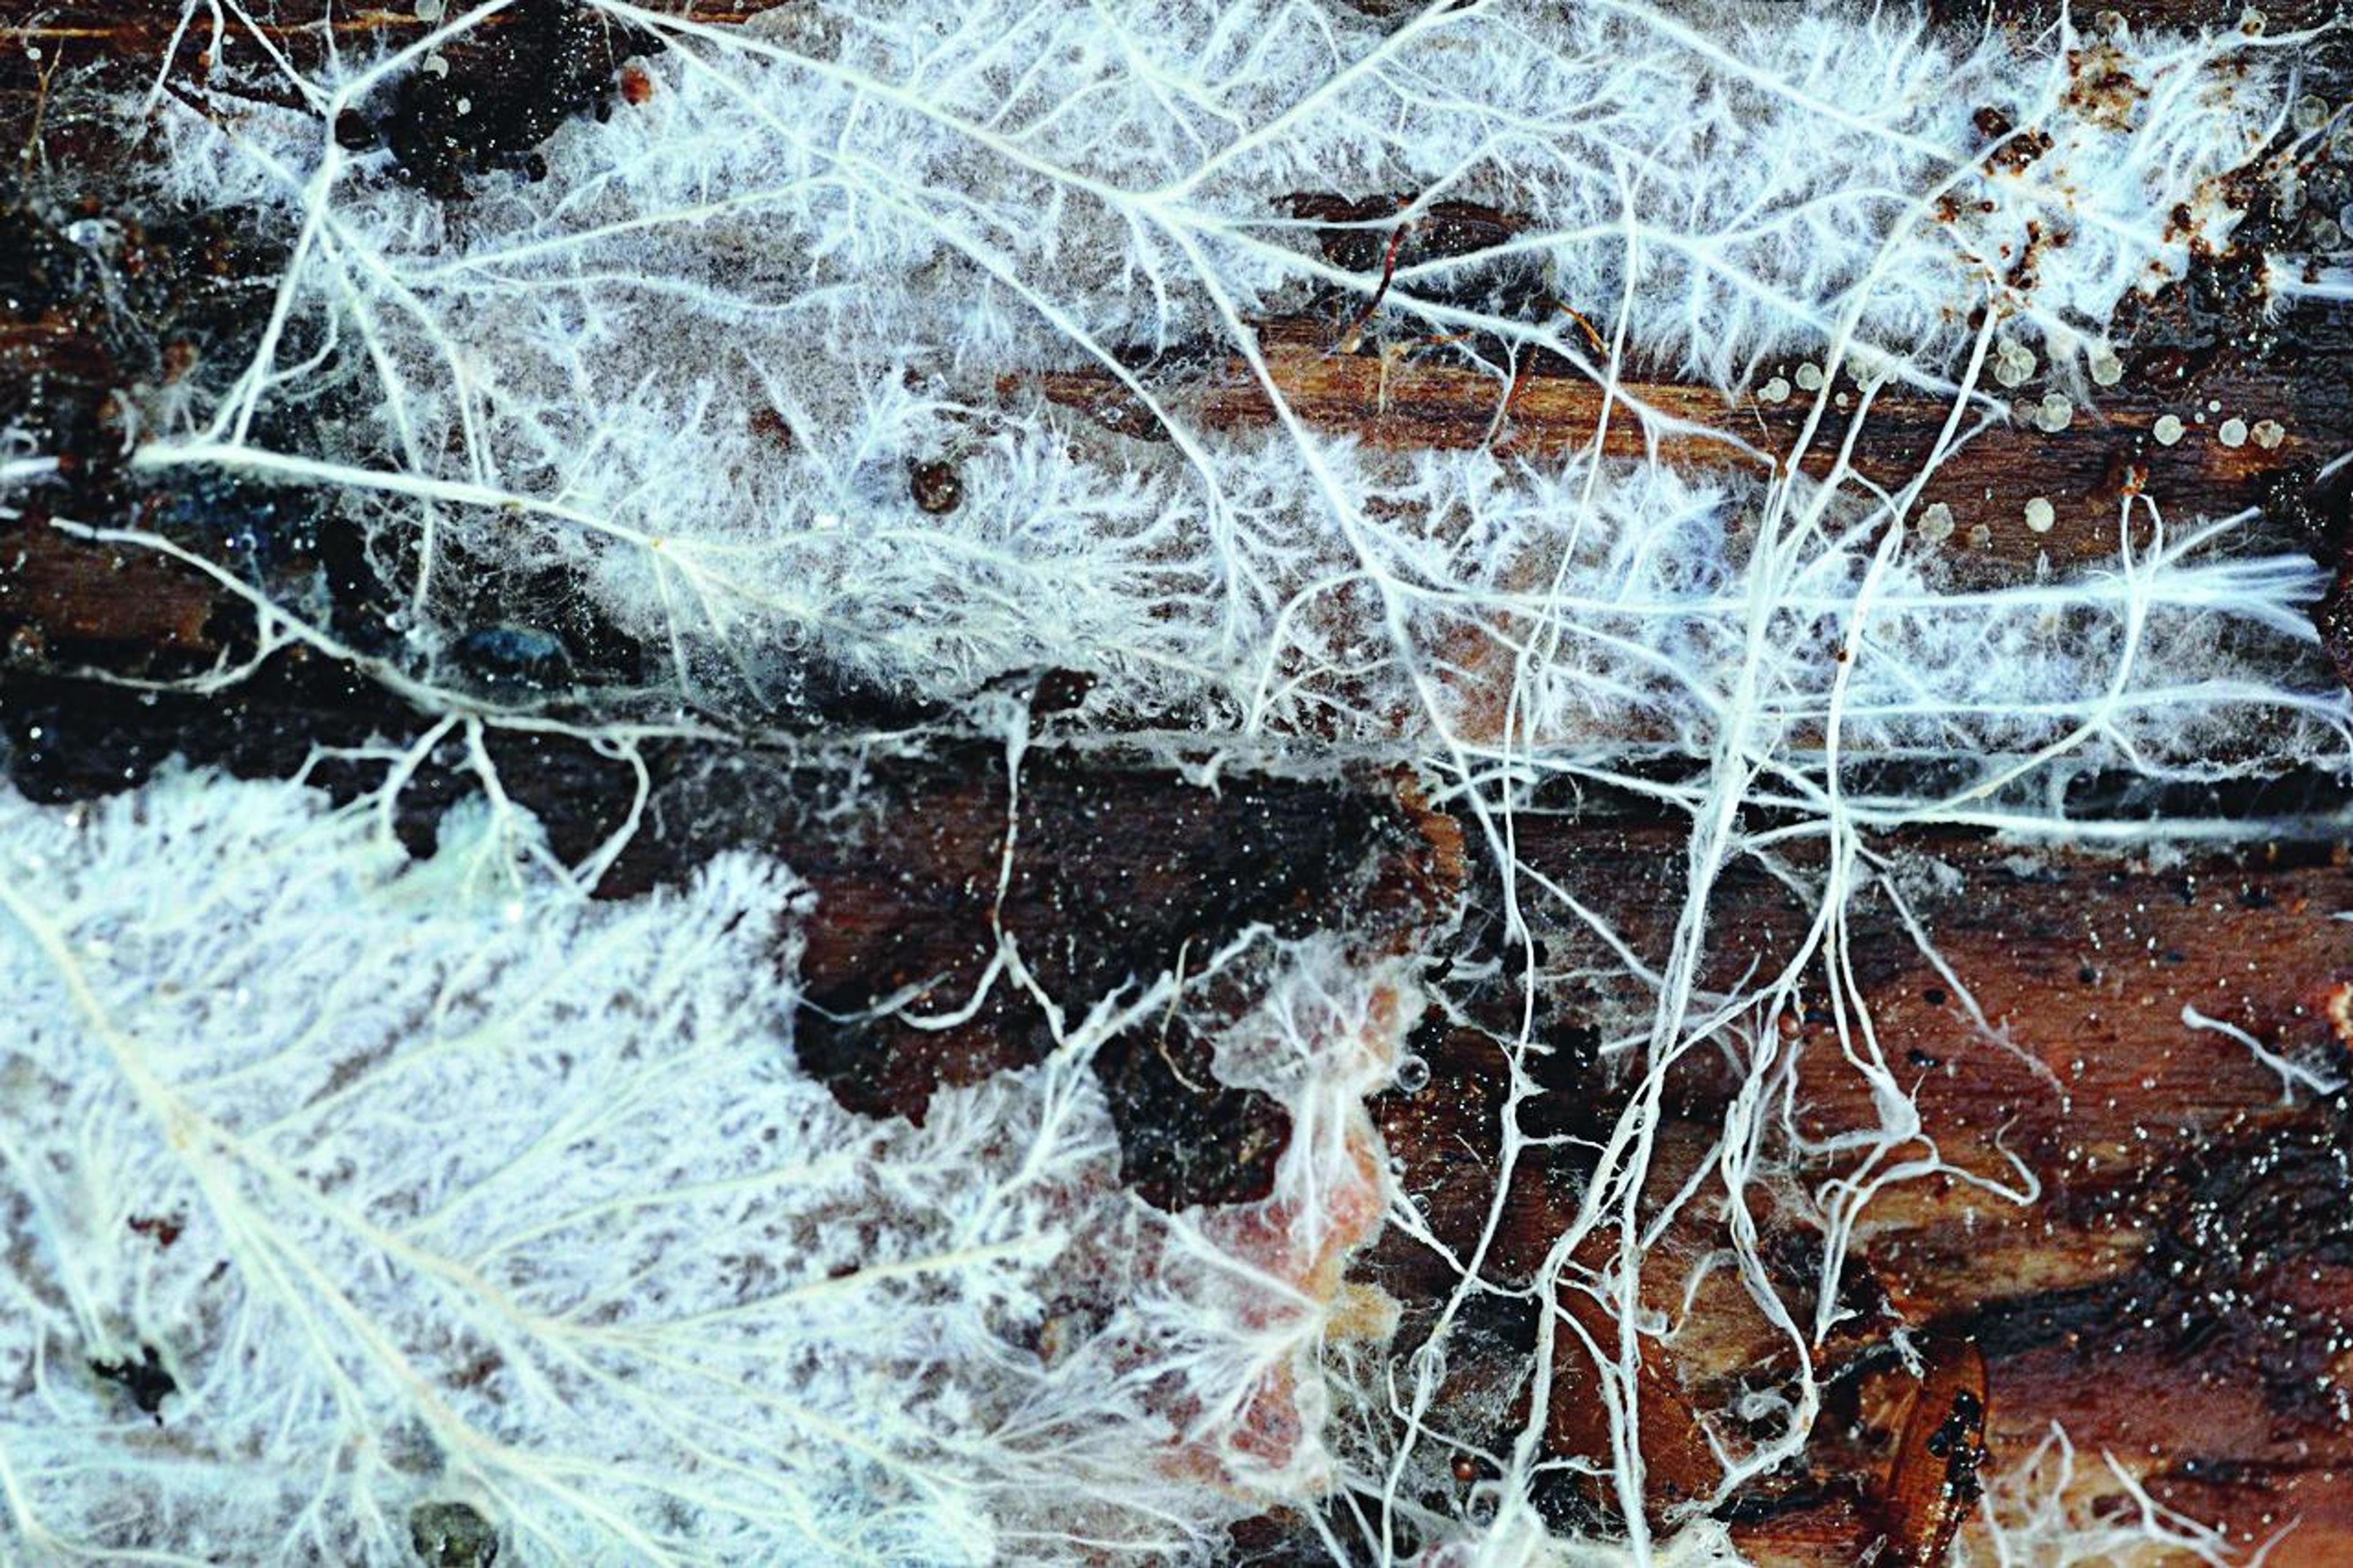 Most fungi live their lives as dynamic networks known as mycelium. This image shows the mycelium of a wood-rotting fungus exploring and consuming a log.